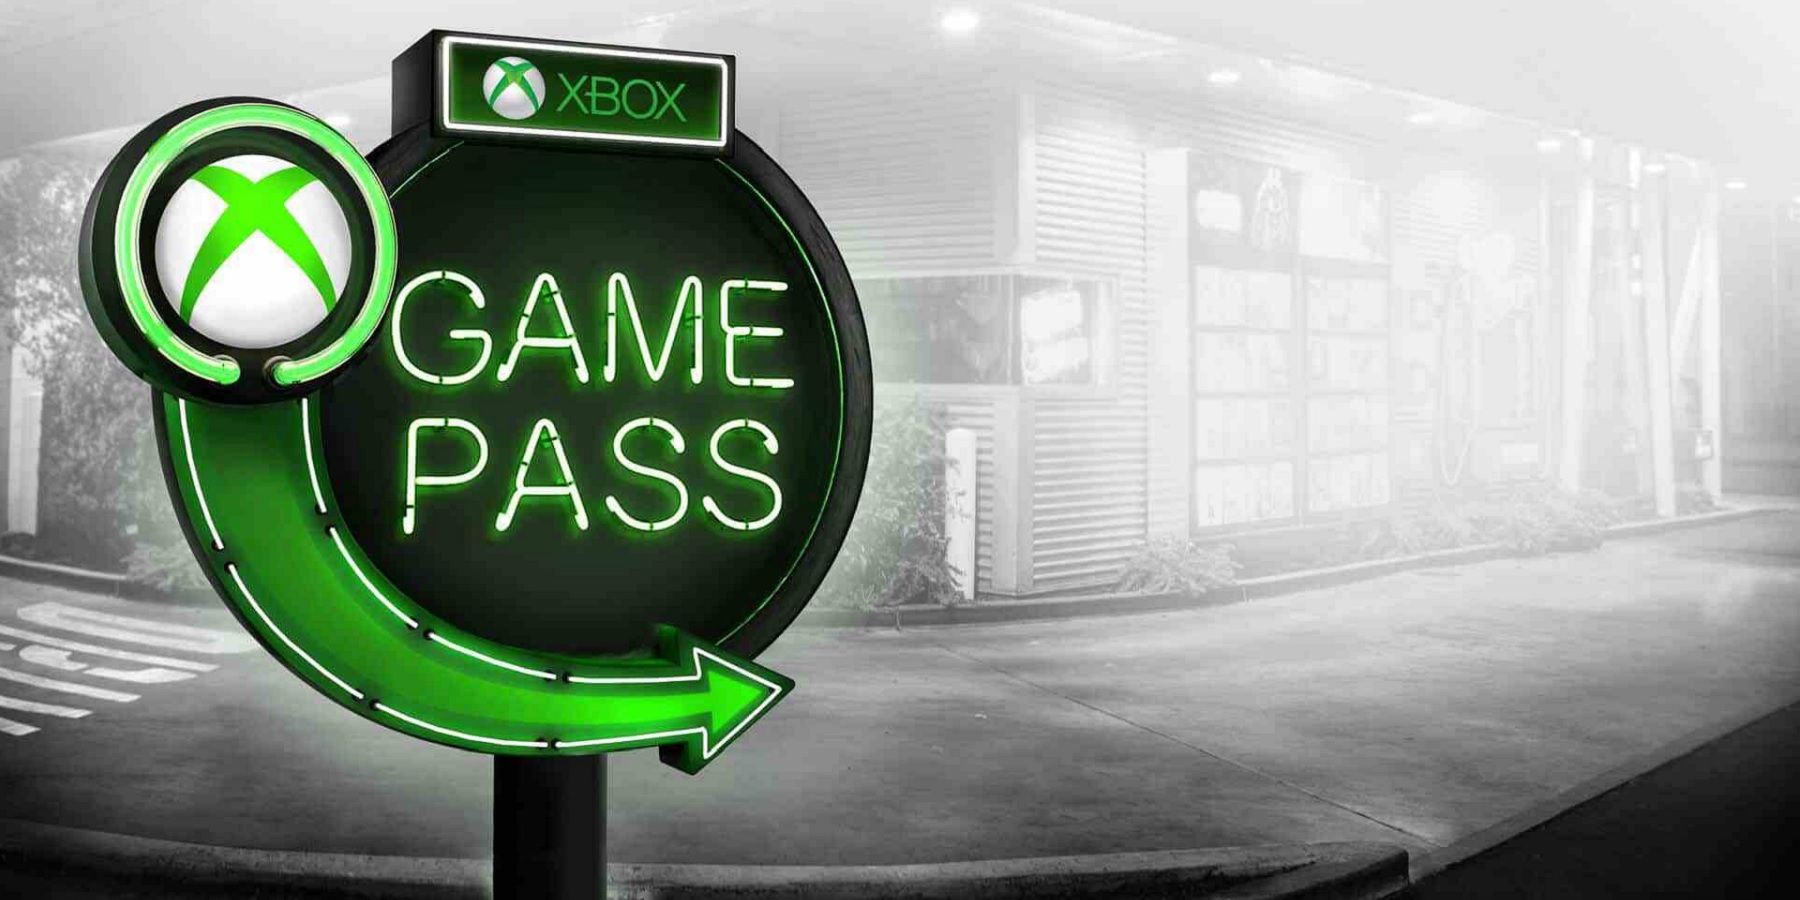 Games coming to Xbox Game Pass PC in November 2021: It Takes Two, Forza  Horizon 5, Minecraft